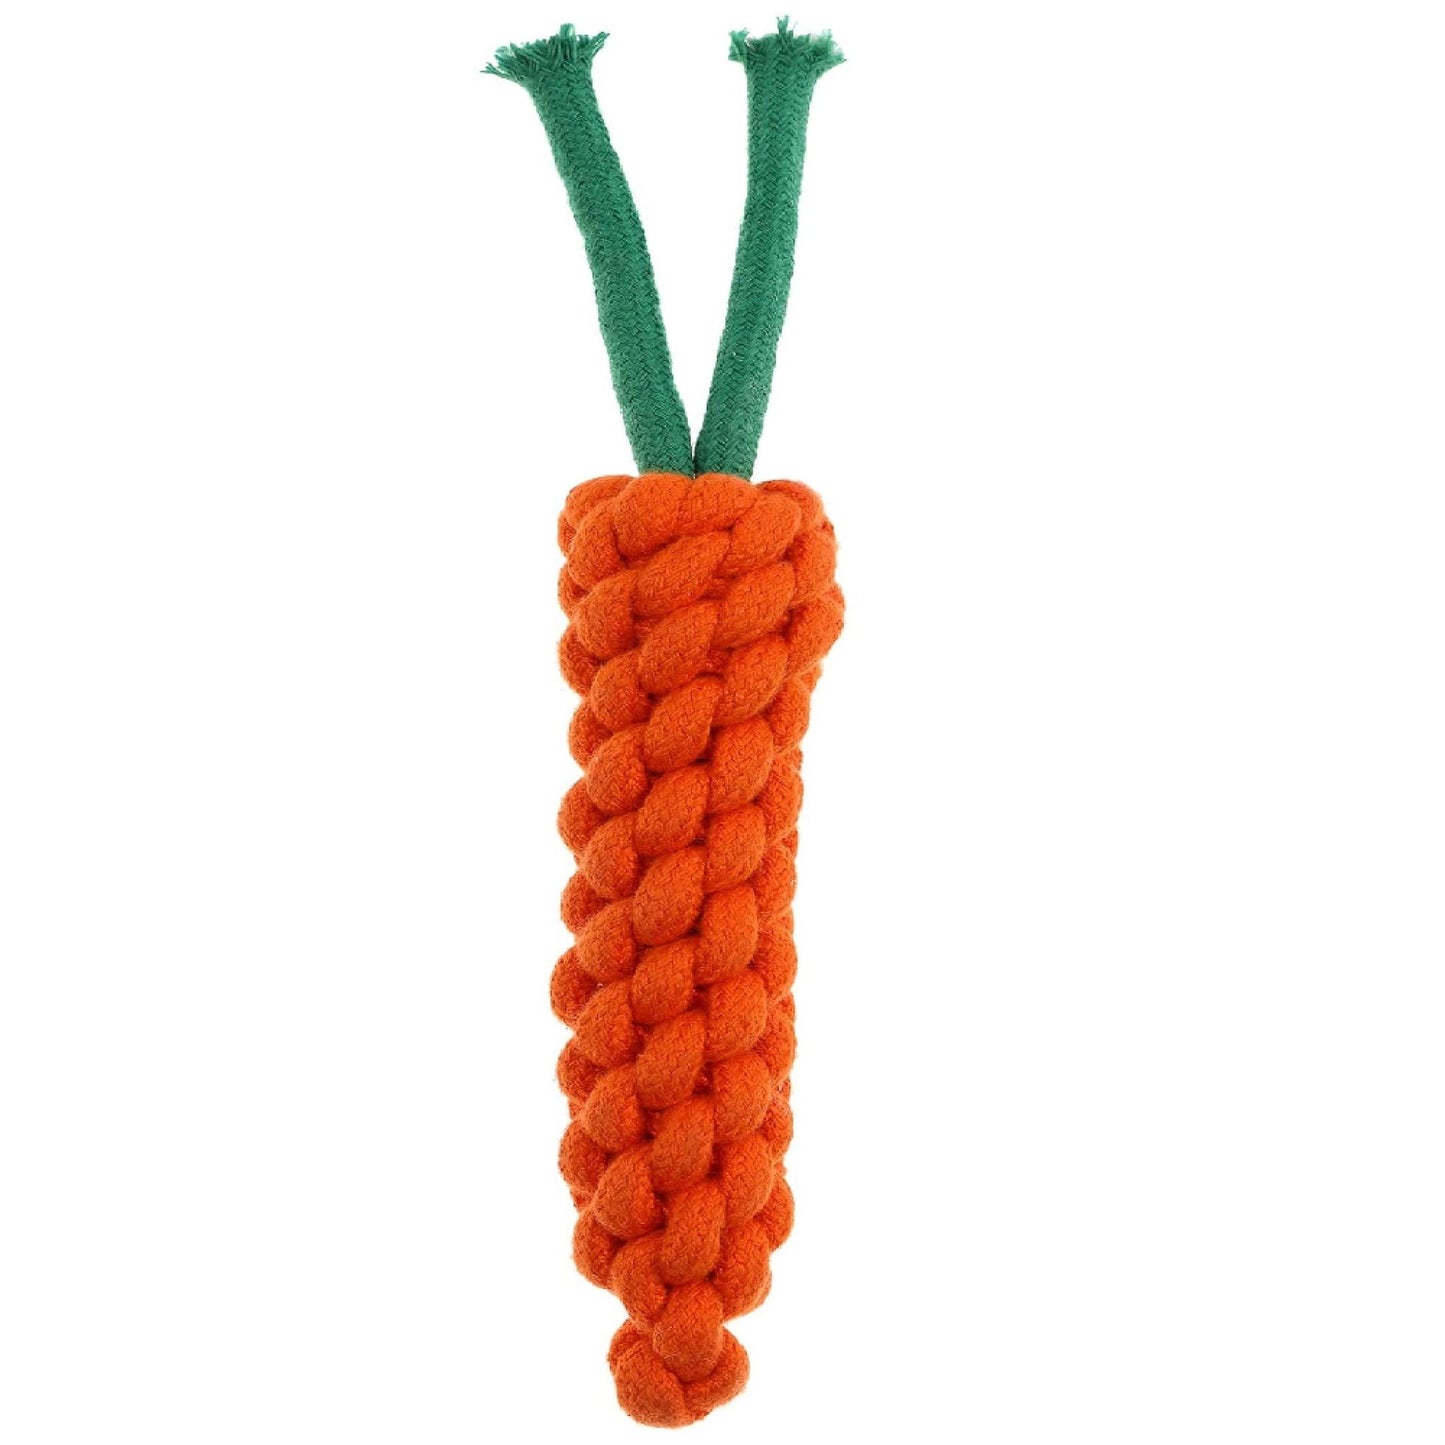 Foodie Puppies Durable Rope Chew Toy for Dogs & Puppies (Carrot-Shaped)